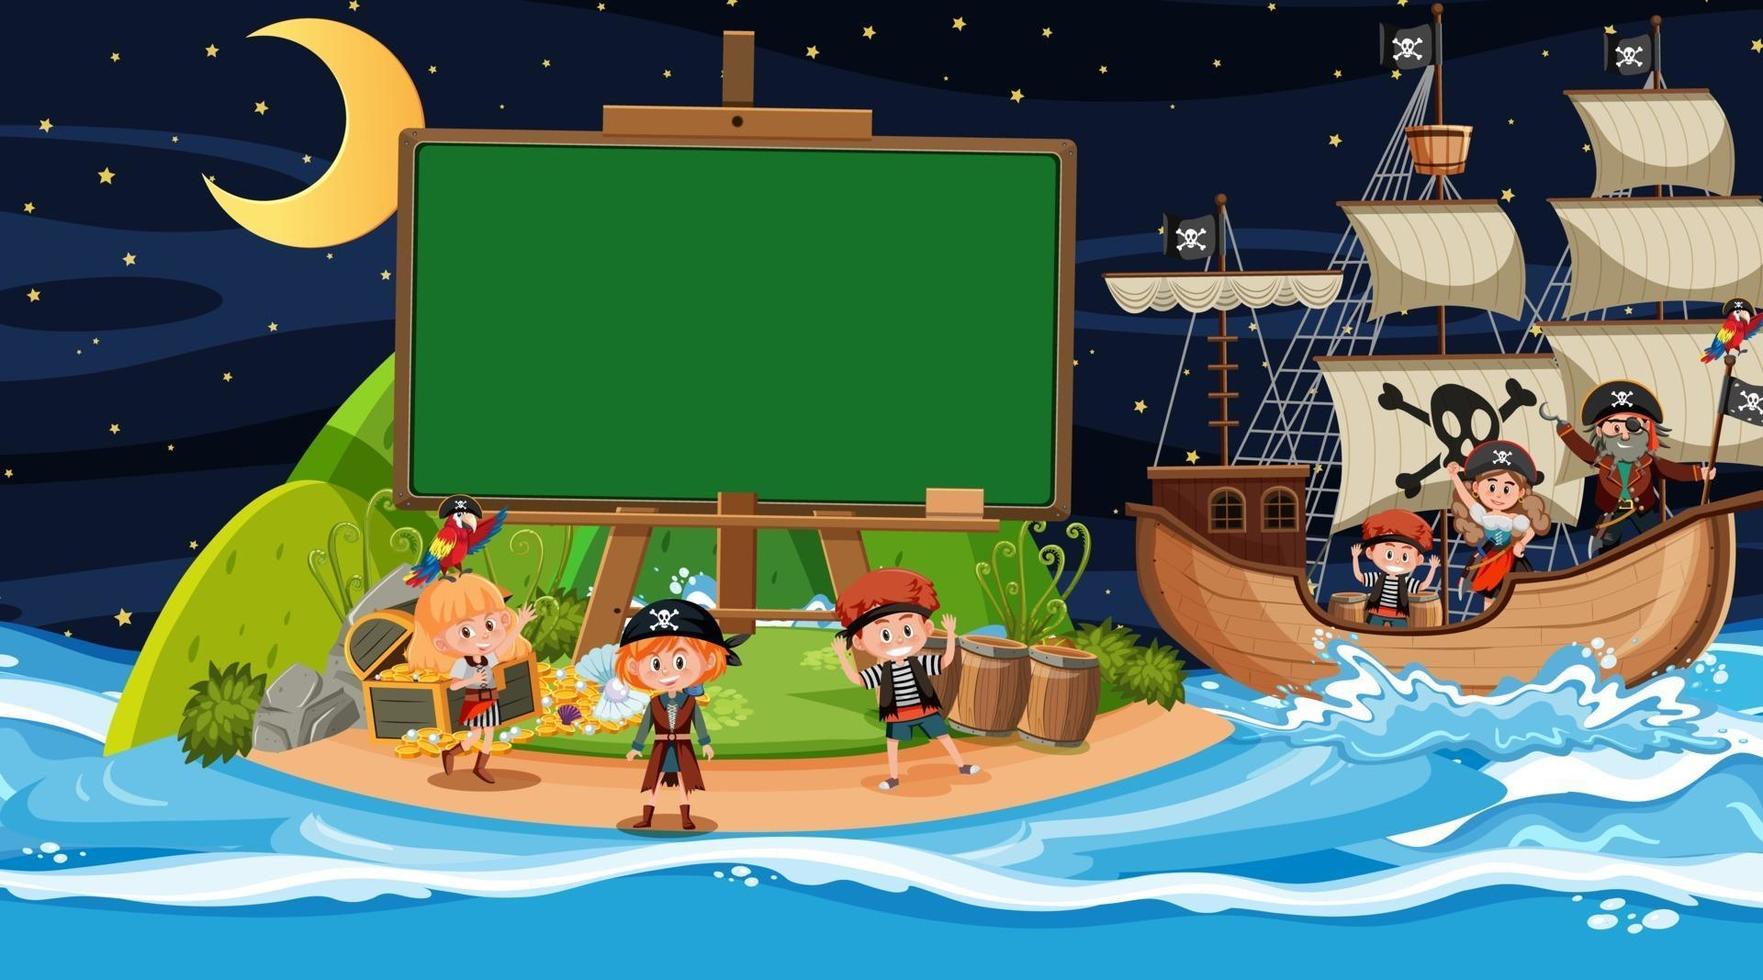 Pirate kids at the beach night scene with an empty banner template vector